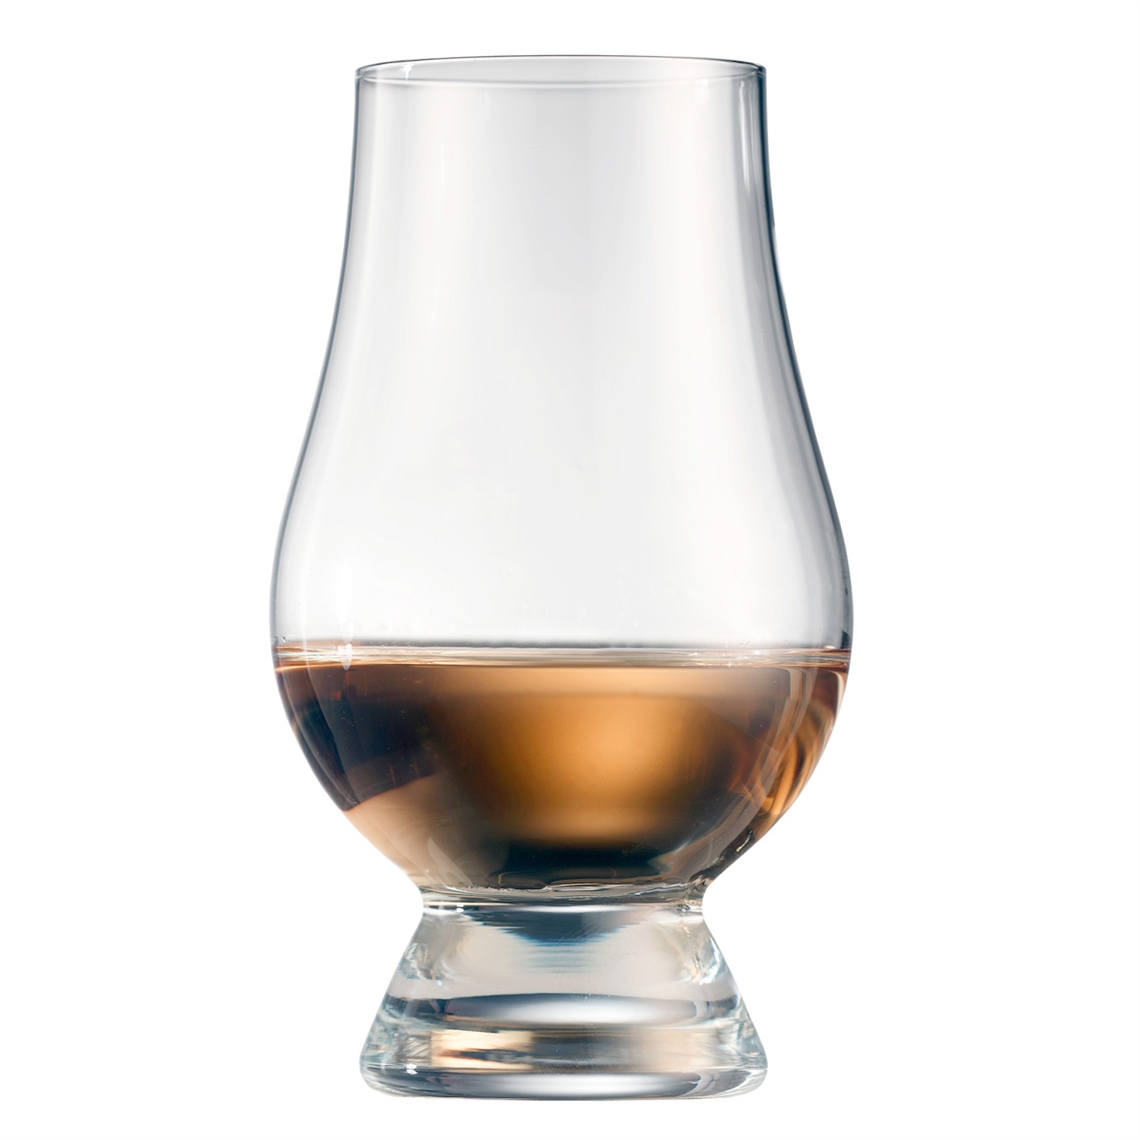 View more riedel from our Whisky Glasses range